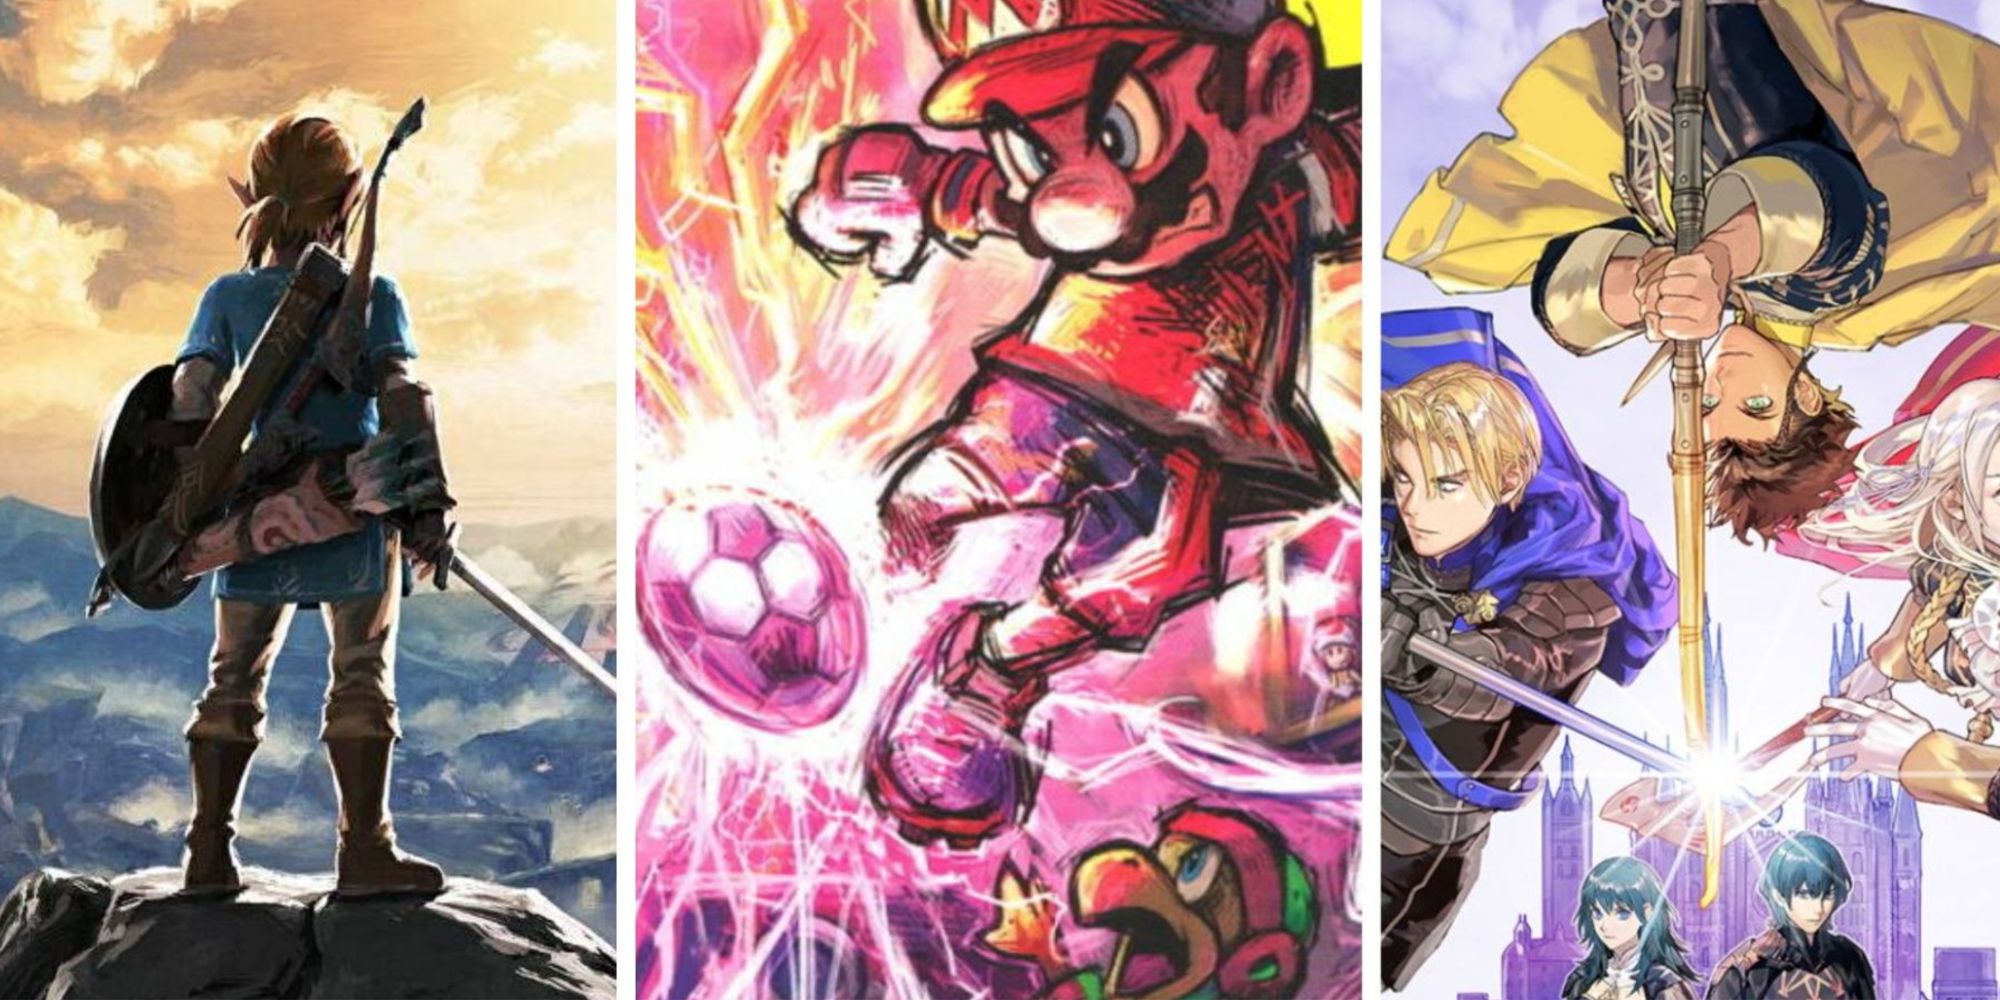 Collage of Nintendo game cover art - Breath of the wild, Fire Emblem Three Houses, and Mario Strikers